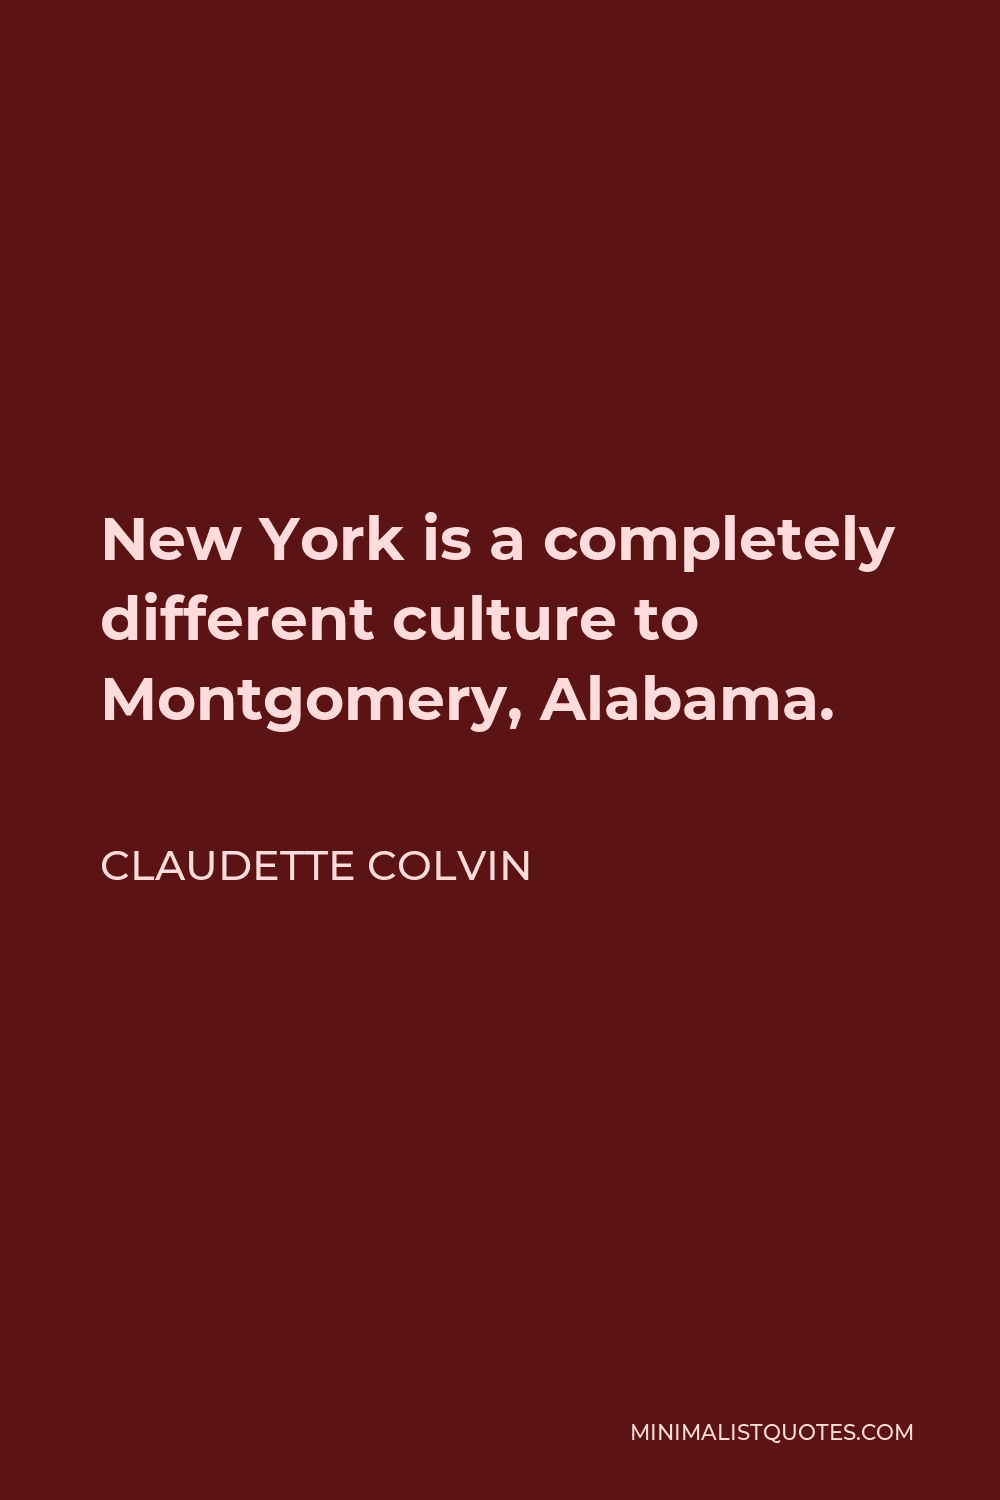 Claudette Colvin Quote - New York is a completely different culture to Montgomery, Alabama.